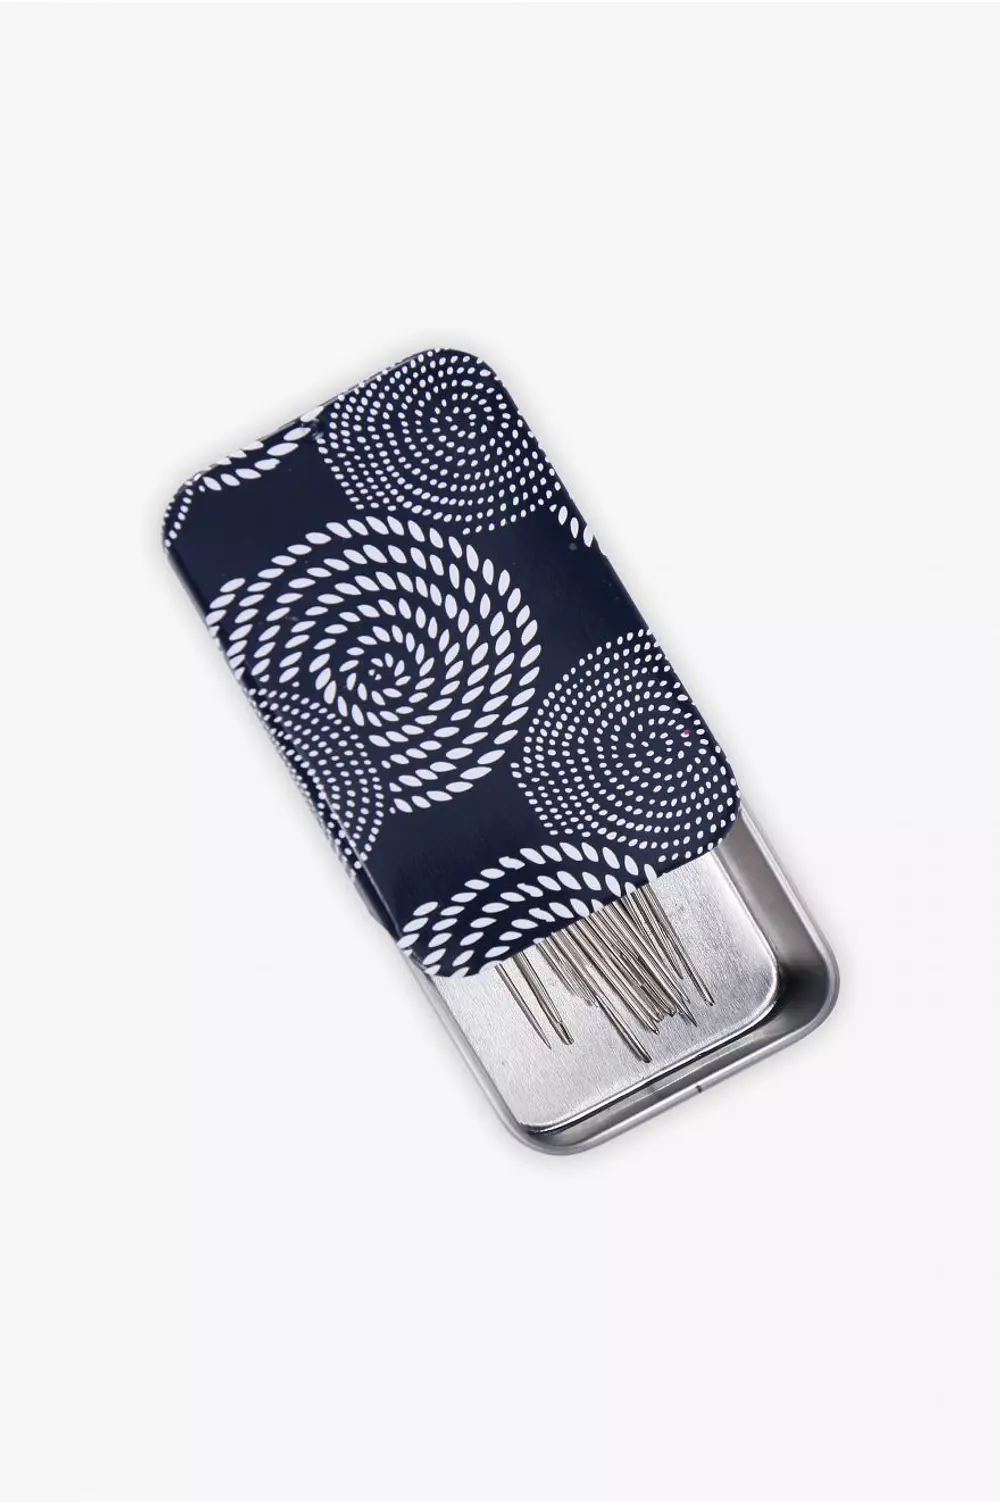 The Beadsmith Two Sided Magnetic Needle Case Basic Elements 6.25 x 3.25 x .75, Snap Closure, One Side Printed with Needle Sizes Keep Your Needles